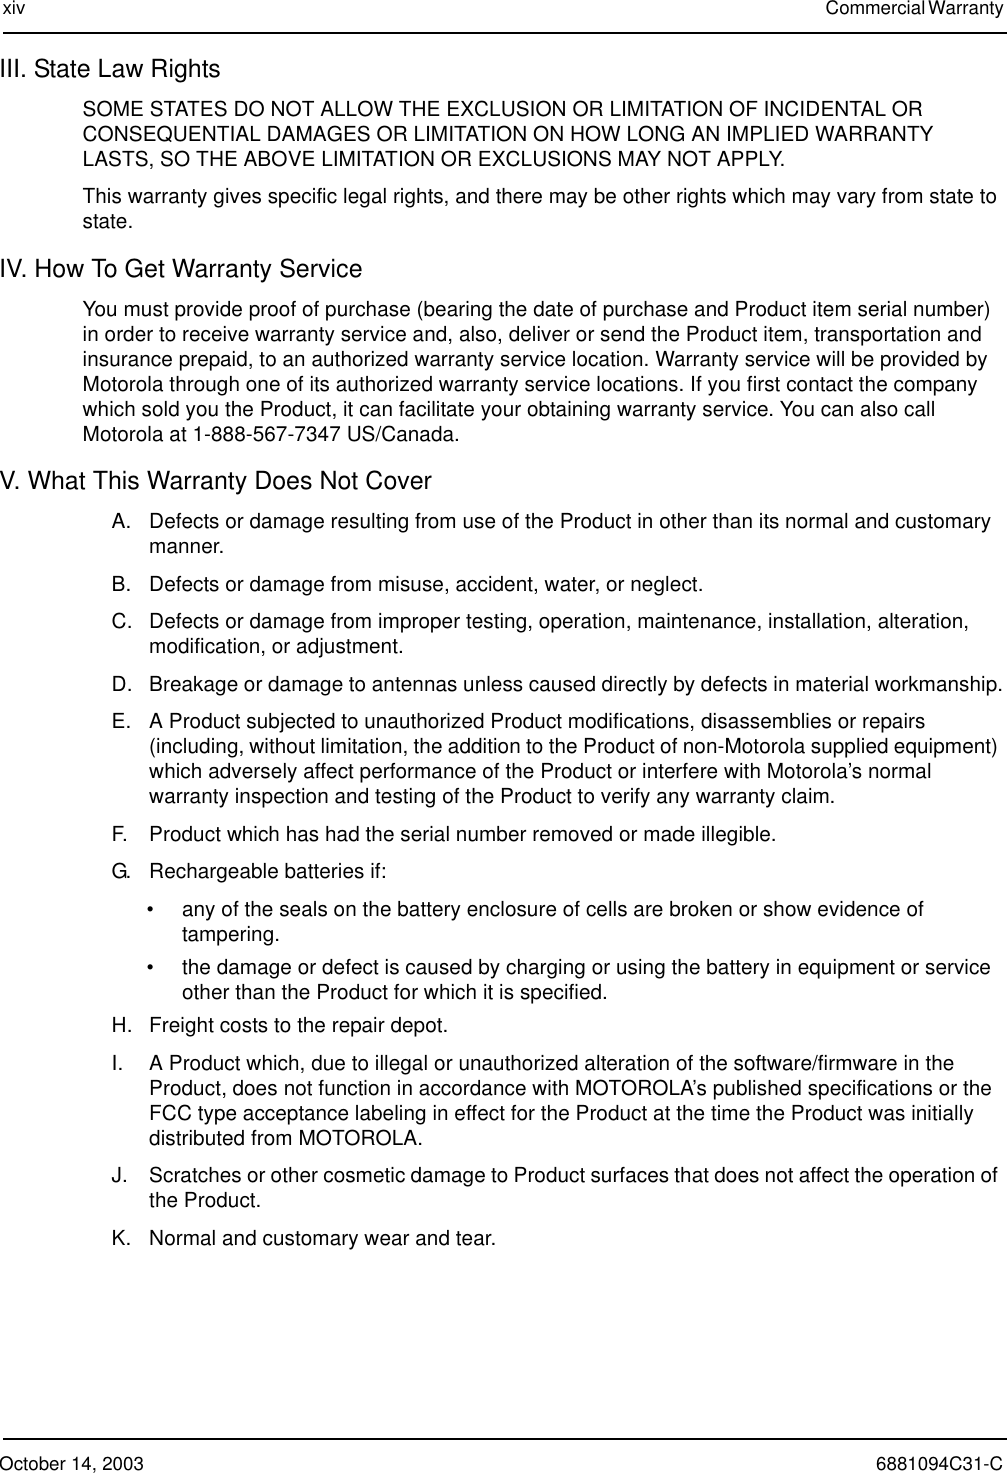 October 14, 2003 6881094C31-Cxiv Commercial Warranty III. State Law RightsSOME STATES DO NOT ALLOW THE EXCLUSION OR LIMITATION OF INCIDENTAL OR CONSEQUENTIAL DAMAGES OR LIMITATION ON HOW LONG AN IMPLIED WARRANTY LASTS, SO THE ABOVE LIMITATION OR EXCLUSIONS MAY NOT APPLY.This warranty gives specific legal rights, and there may be other rights which may vary from state to state.IV. How To Get Warranty ServiceYou must provide proof of purchase (bearing the date of purchase and Product item serial number) in order to receive warranty service and, also, deliver or send the Product item, transportation and insurance prepaid, to an authorized warranty service location. Warranty service will be provided by Motorola through one of its authorized warranty service locations. If you first contact the company which sold you the Product, it can facilitate your obtaining warranty service. You can also call Motorola at 1-888-567-7347 US/Canada.V. What This Warranty Does Not CoverA. Defects or damage resulting from use of the Product in other than its normal and customary manner.B. Defects or damage from misuse, accident, water, or neglect.C. Defects or damage from improper testing, operation, maintenance, installation, alteration, modification, or adjustment.D. Breakage or damage to antennas unless caused directly by defects in material workmanship.E. A Product subjected to unauthorized Product modifications, disassemblies or repairs (including, without limitation, the addition to the Product of non-Motorola supplied equipment) which adversely affect performance of the Product or interfere with Motorola’s normal warranty inspection and testing of the Product to verify any warranty claim.F. Product which has had the serial number removed or made illegible.G. Rechargeable batteries if:• any of the seals on the battery enclosure of cells are broken or show evidence of tampering.• the damage or defect is caused by charging or using the battery in equipment or service other than the Product for which it is specified.H. Freight costs to the repair depot.I. A Product which, due to illegal or unauthorized alteration of the software/firmware in the Product, does not function in accordance with MOTOROLA’s published specifications or the FCC type acceptance labeling in effect for the Product at the time the Product was initially distributed from MOTOROLA.J. Scratches or other cosmetic damage to Product surfaces that does not affect the operation of the Product.K. Normal and customary wear and tear.